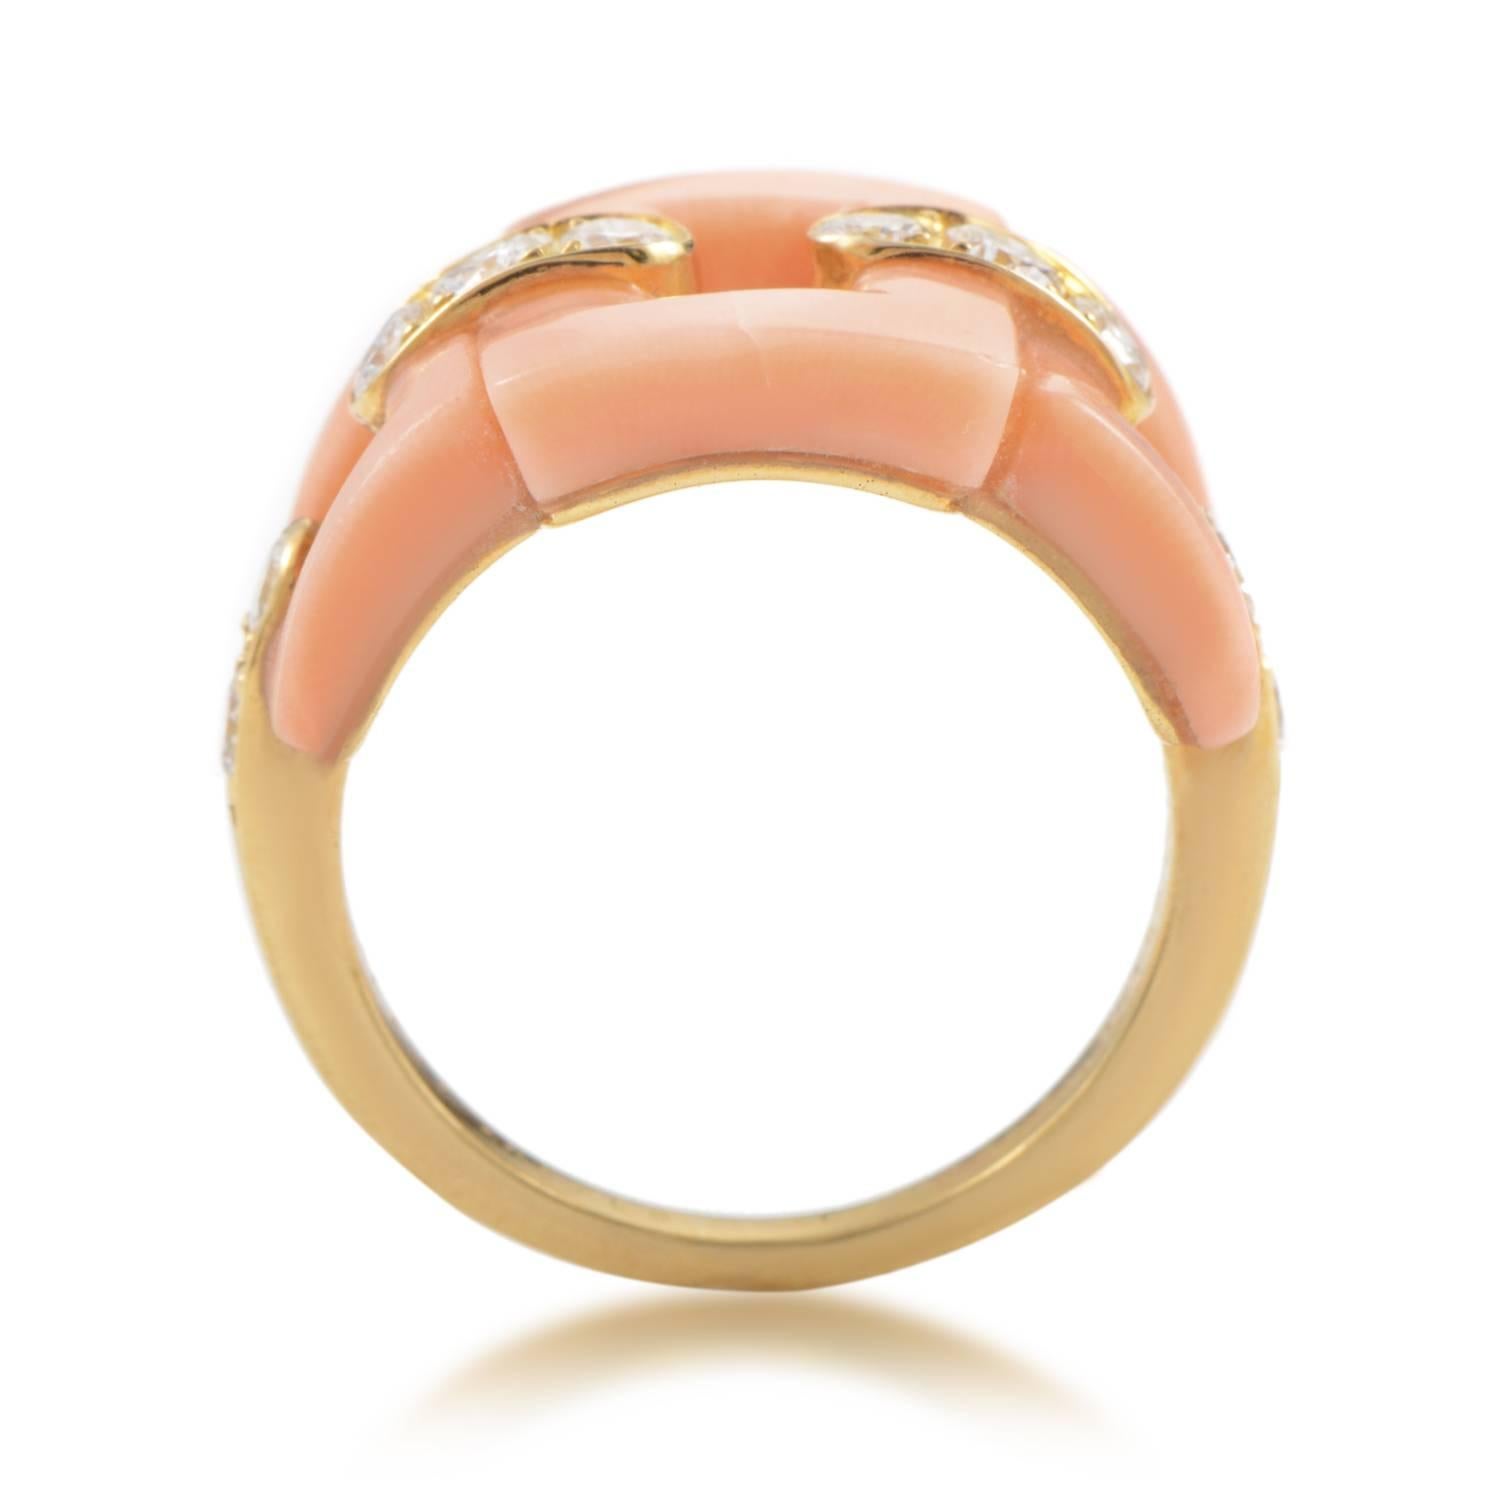 Seemingly comprised of adorable links made of delightful pink coral stone, the top of this spellbinding 18K yellow gold ring from Van Cleef & Arpels also boasts 0.58ct of scintillating diamonds for a gorgeous sight.
Included Items: Manufacturer's